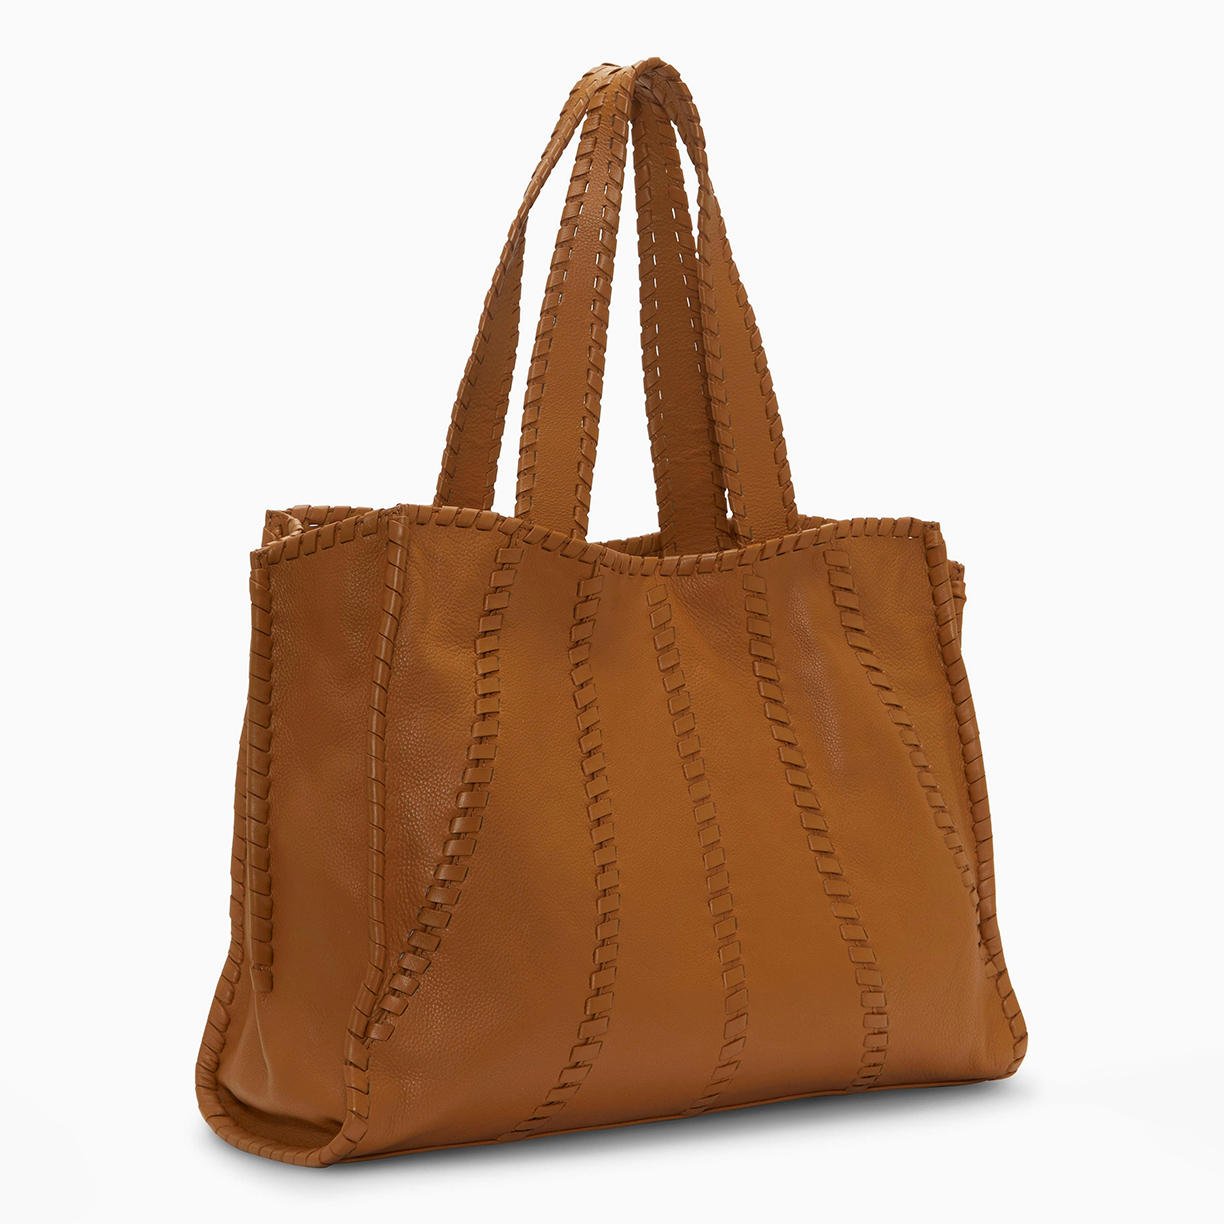 Vince Camuto Accessories & Luggage Up to 65% Off